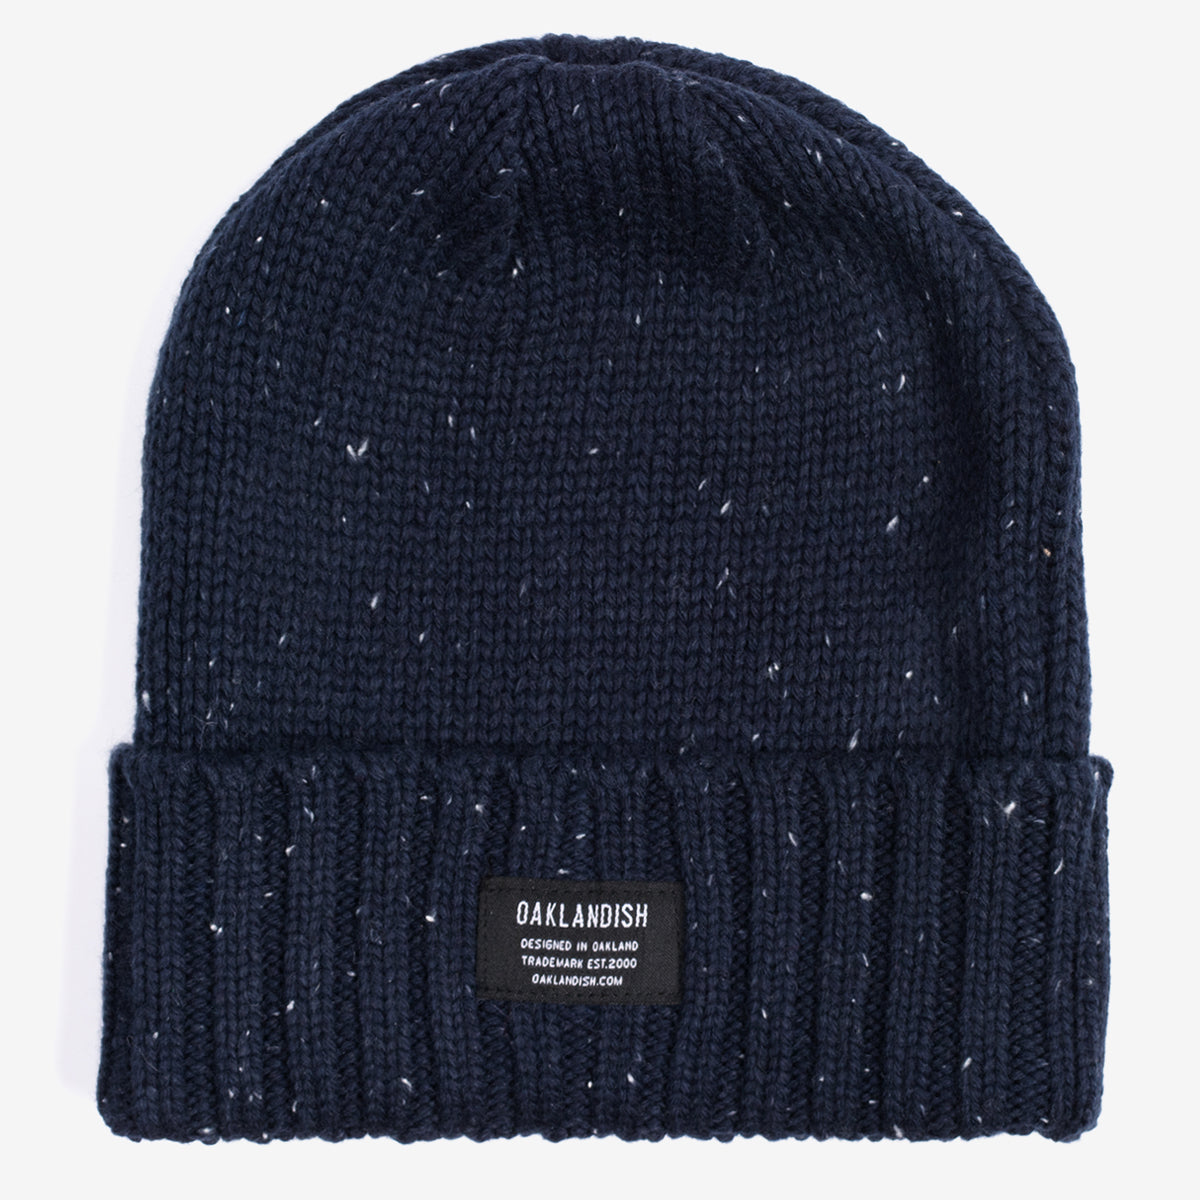 White flecked navy cuffed beanie with Oaklandish tag on the front.